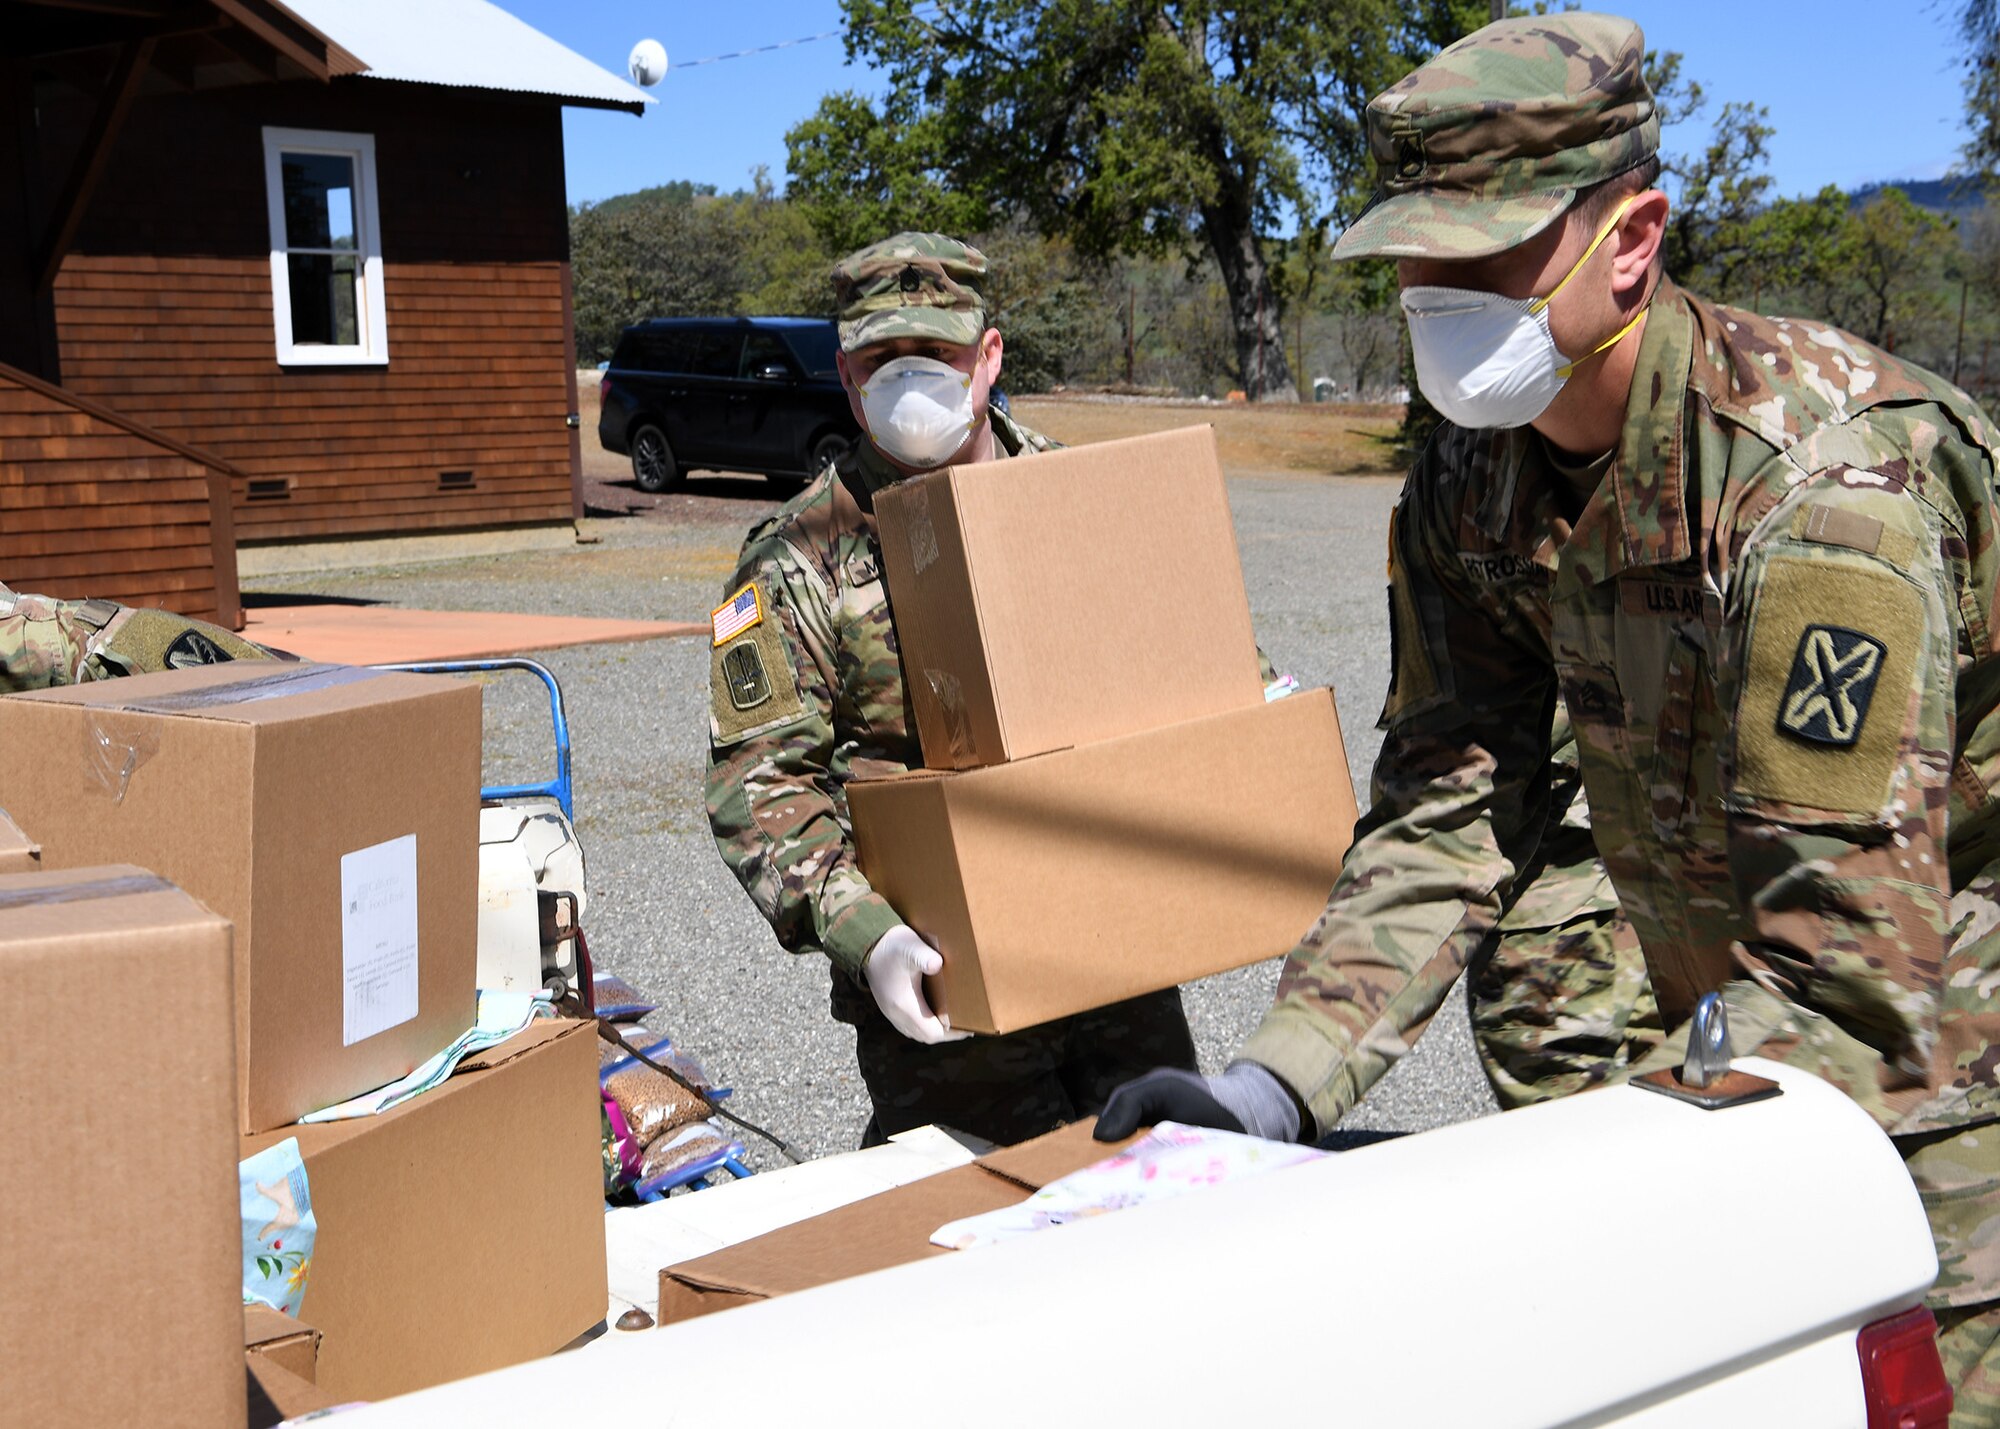 U.S. Army Staff Sgt. Joshua A. Mosley, left, and Staff Sgt. Chris Petrossian, both of the California Army National Guard’s 115th Regional Support Group, load food items into a volunteer’s truck to distribute to Napa Valley residents who are homebound during the COVID-19 crisis while working at Pope Valley Farm Center in St. Helena, California, April 1, 2020.